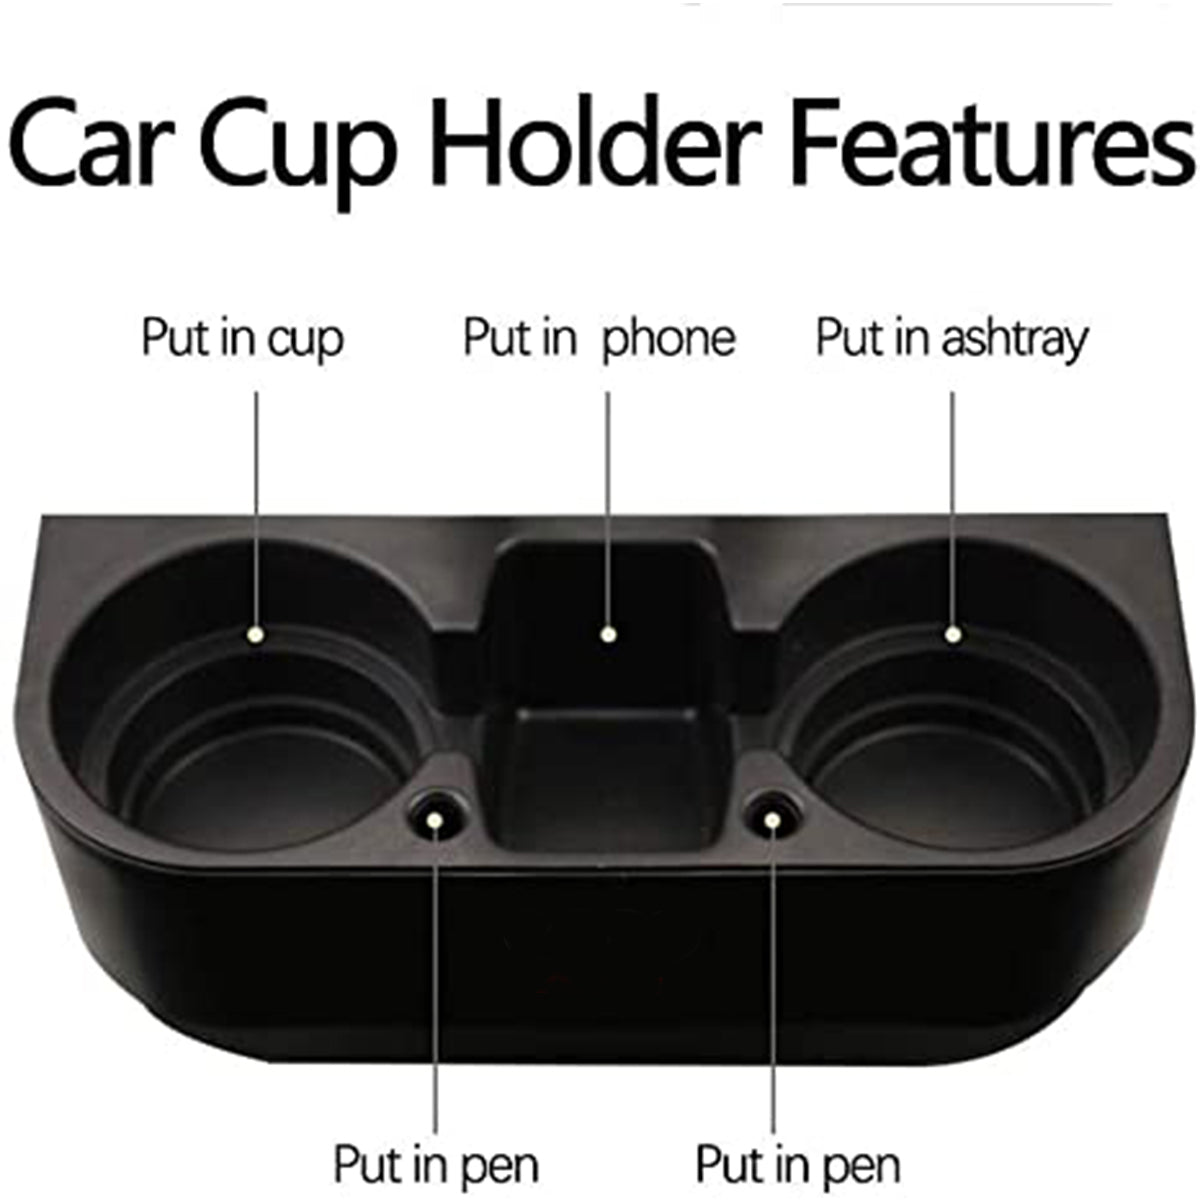 Cup Holder Portable Multifunction Vehicle Seat Cup Cell Phone Drinks Holder Box Car Interior Organizer, Custom For Your Cars, Car Accessories MT11995 - Delicate Leather